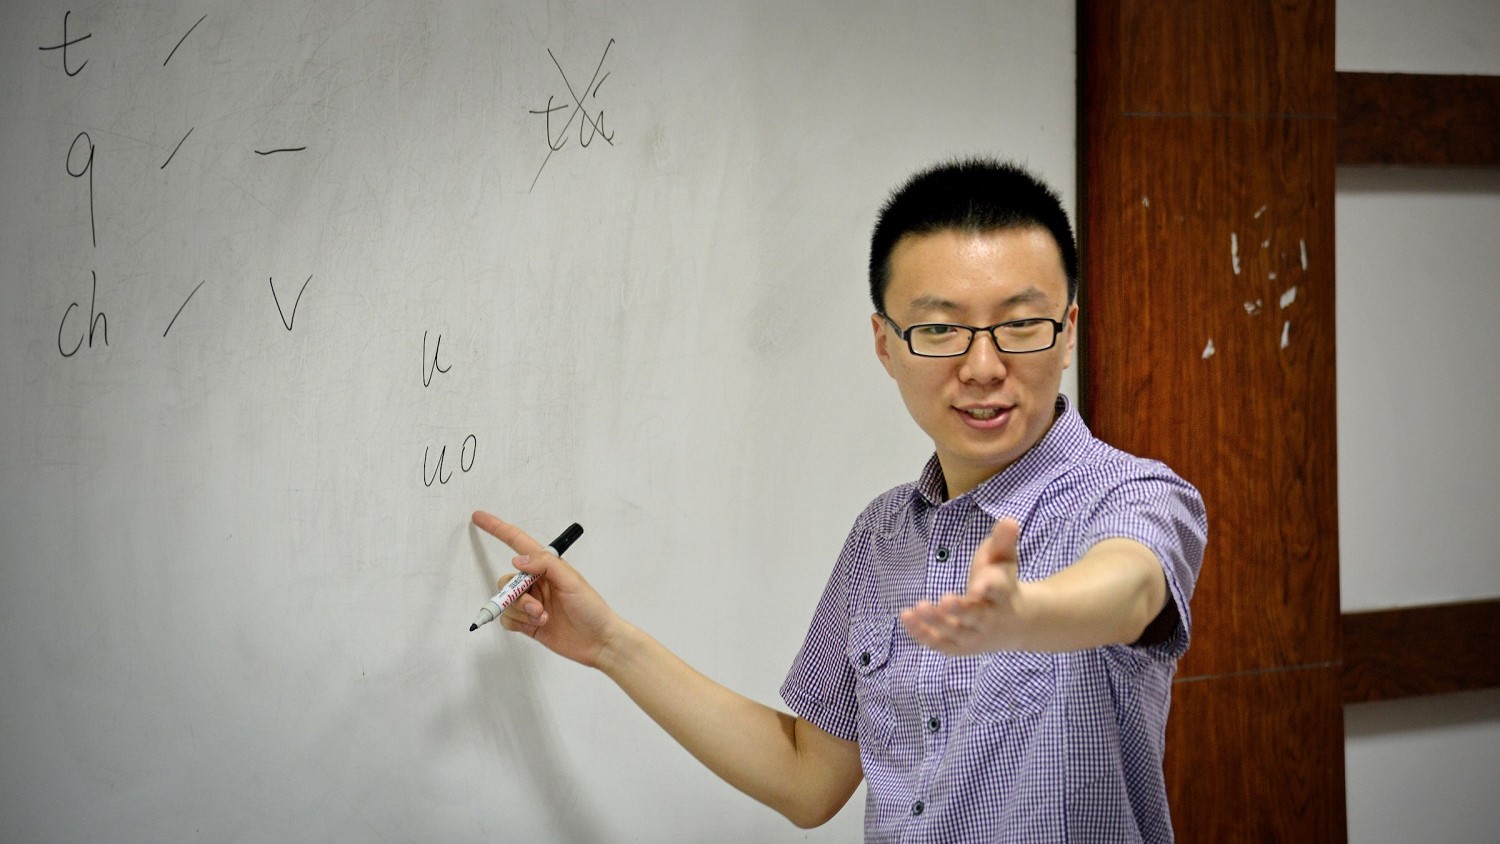 Chinese instructor looks for the proper pronunciation during class